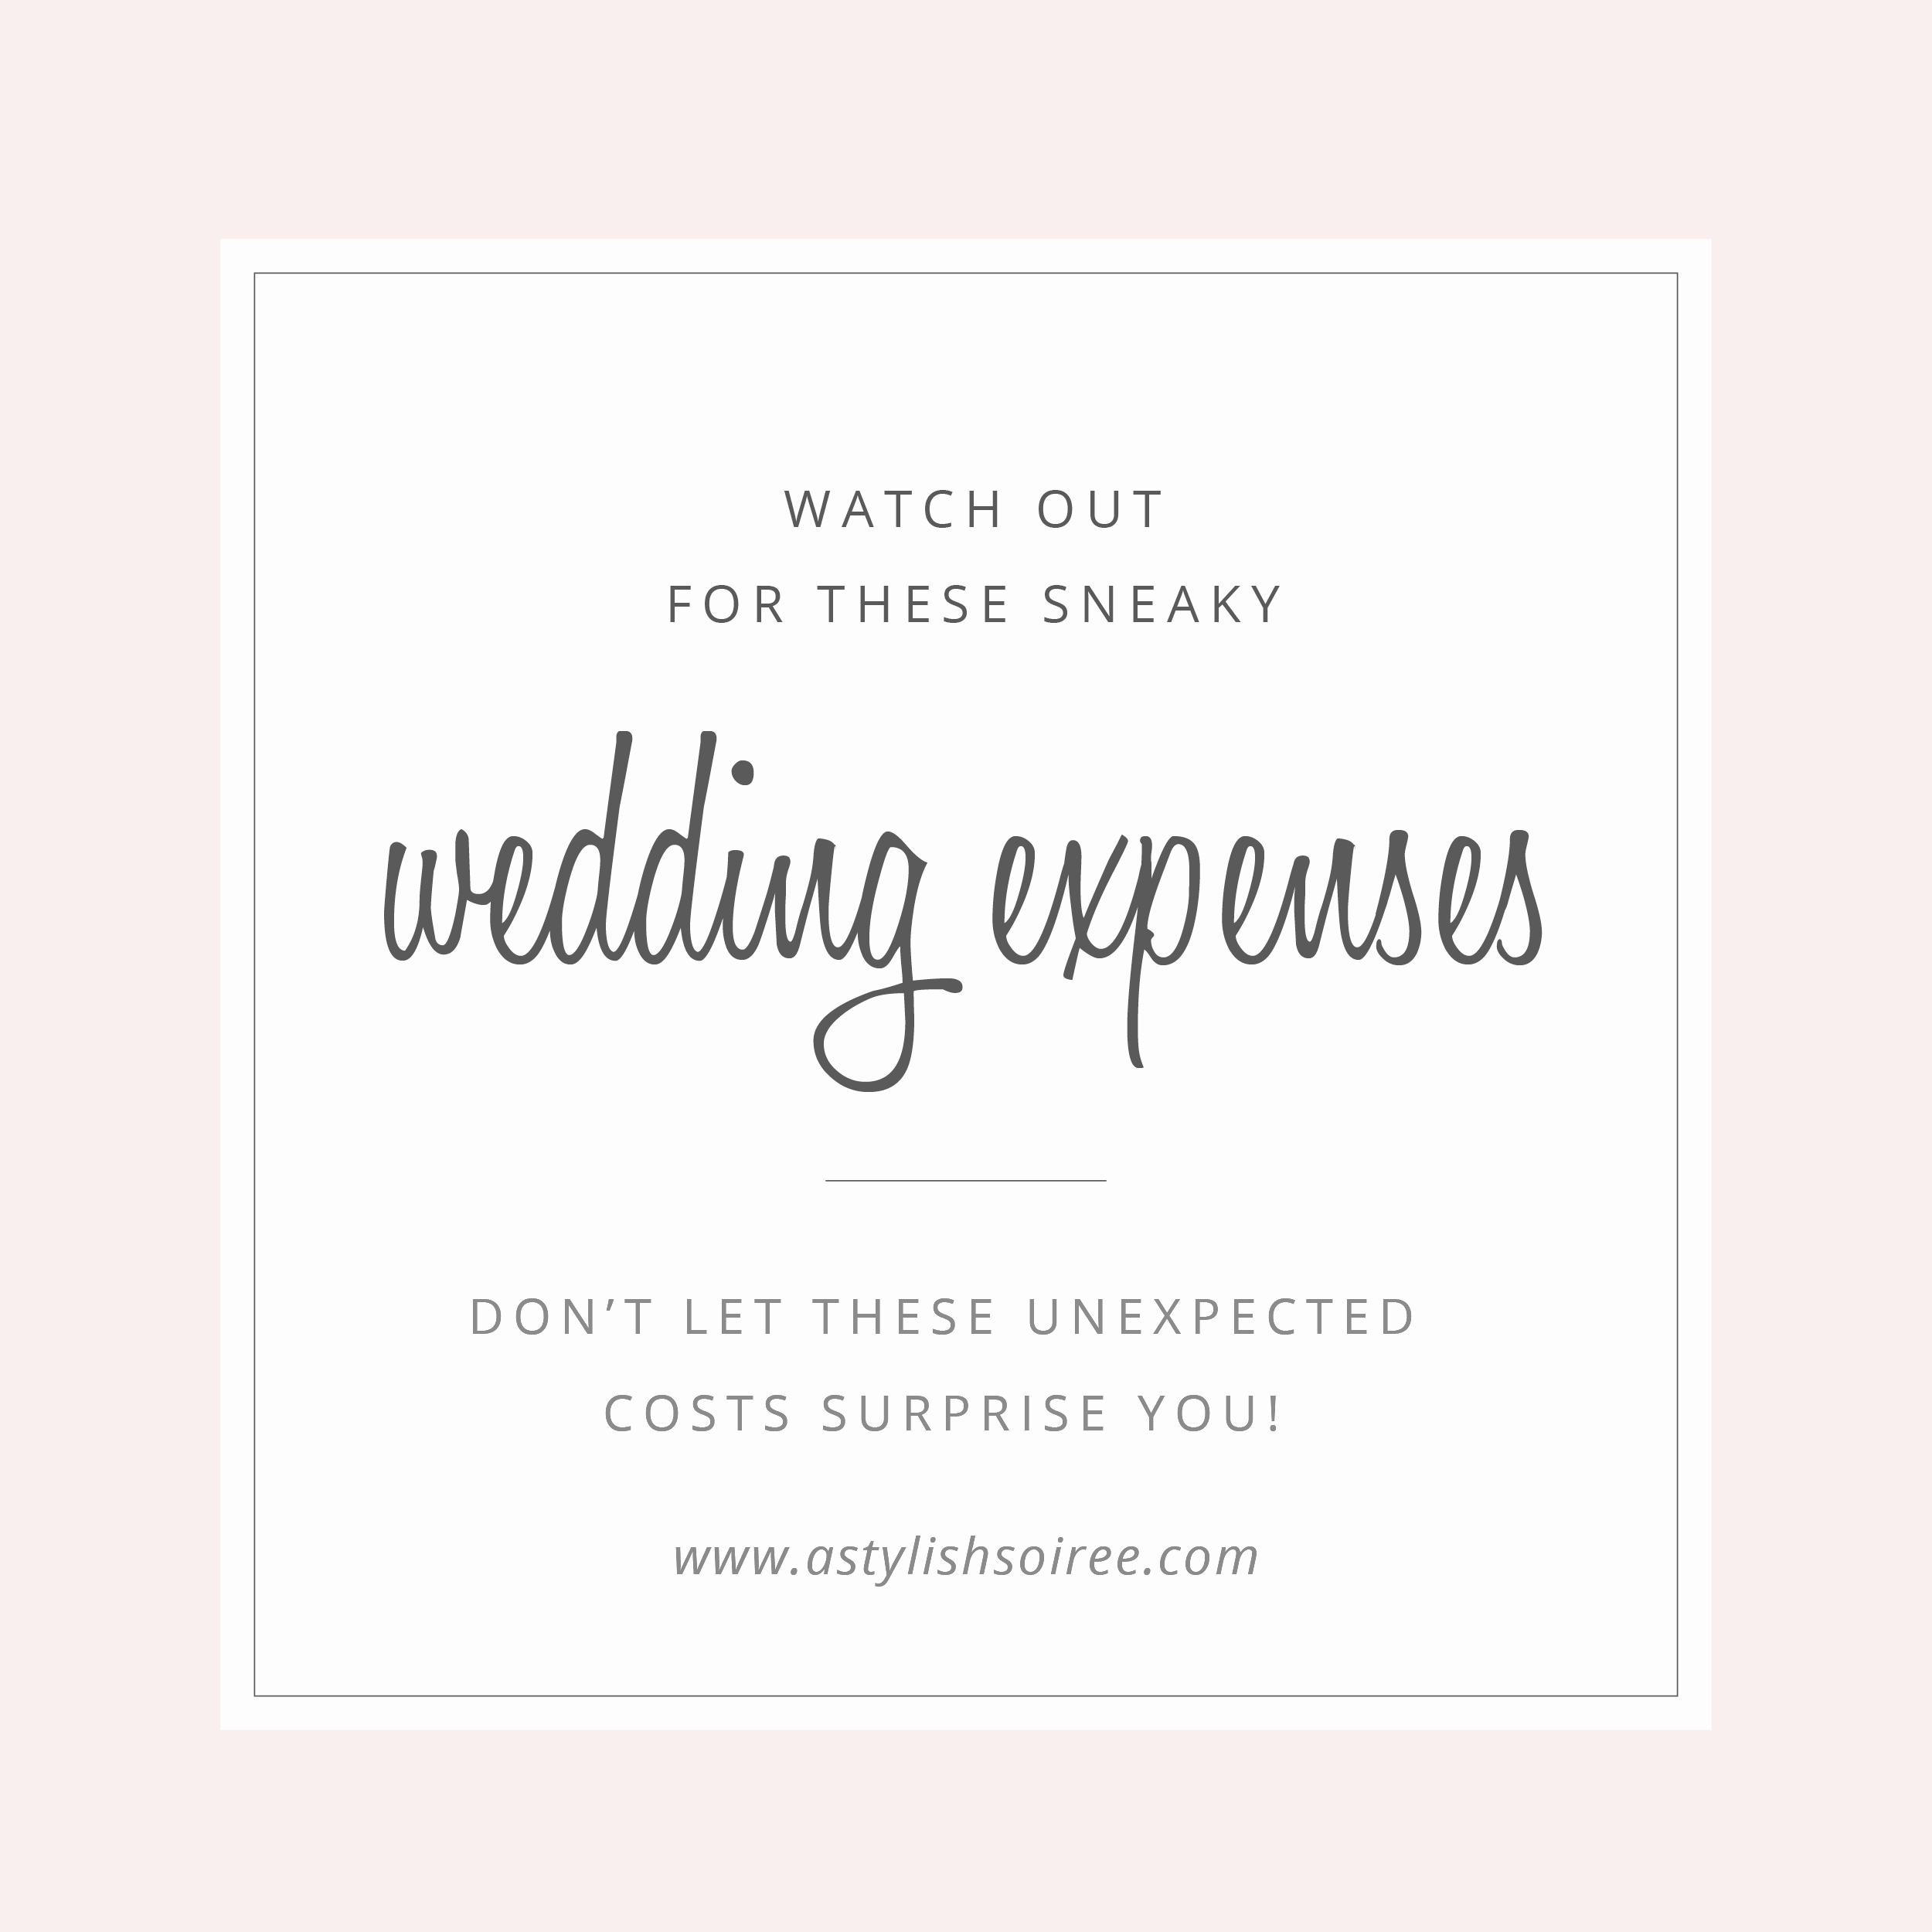 Don't Let These Sneaky Wedding Expenses Take You By Surprise! 